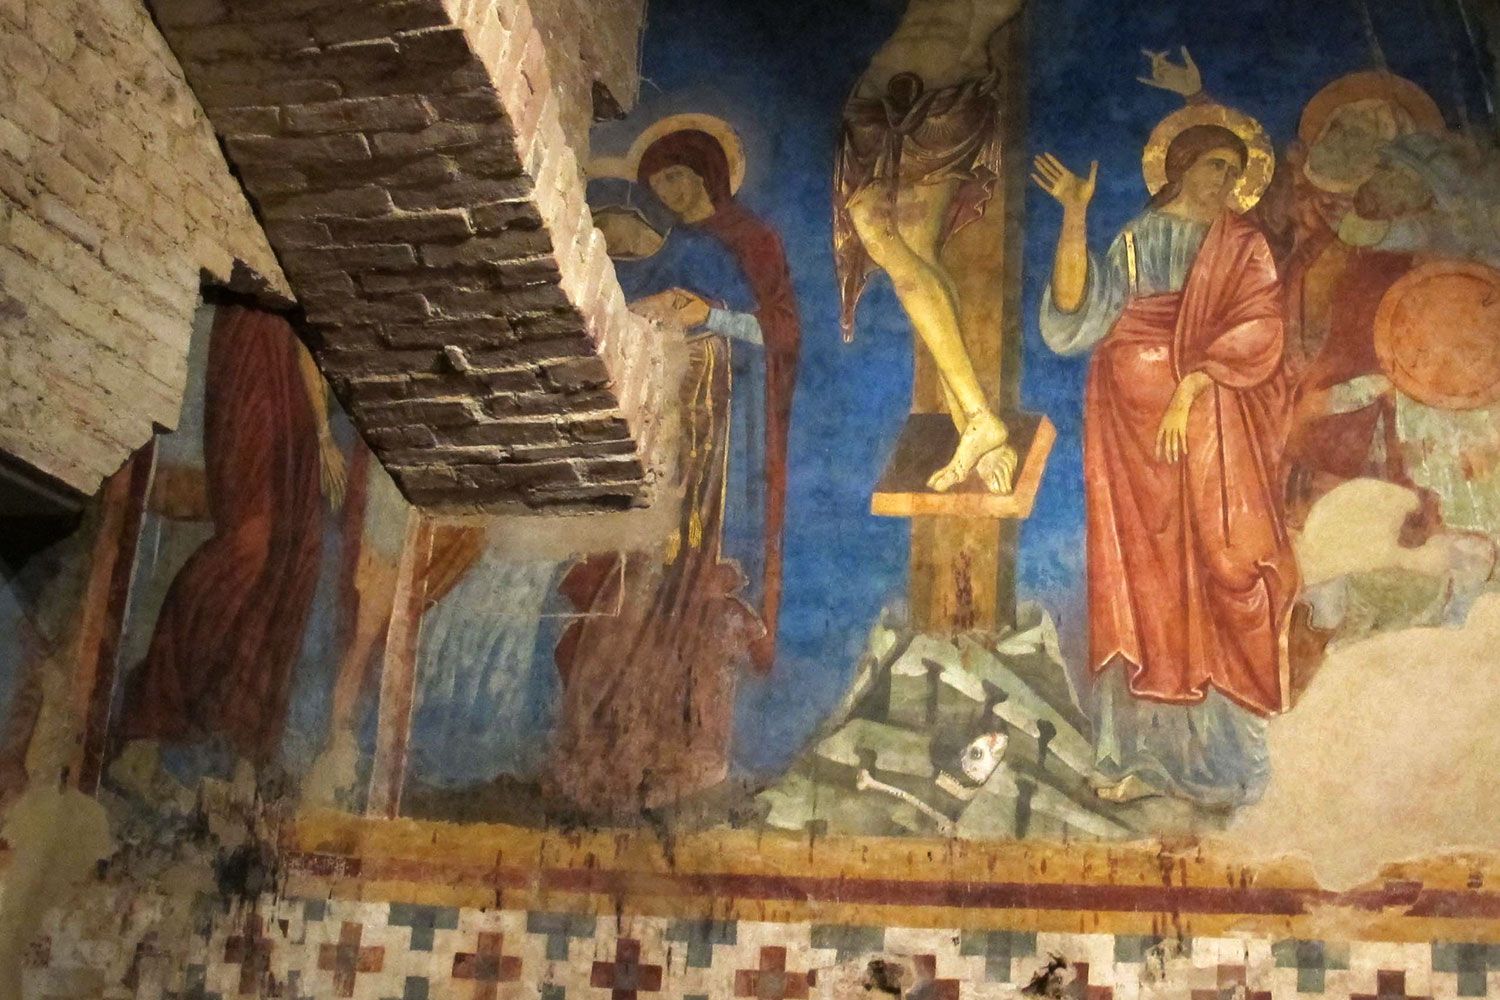 13th century fresco in the Crypt of the Duomo of Siena, Tuscany